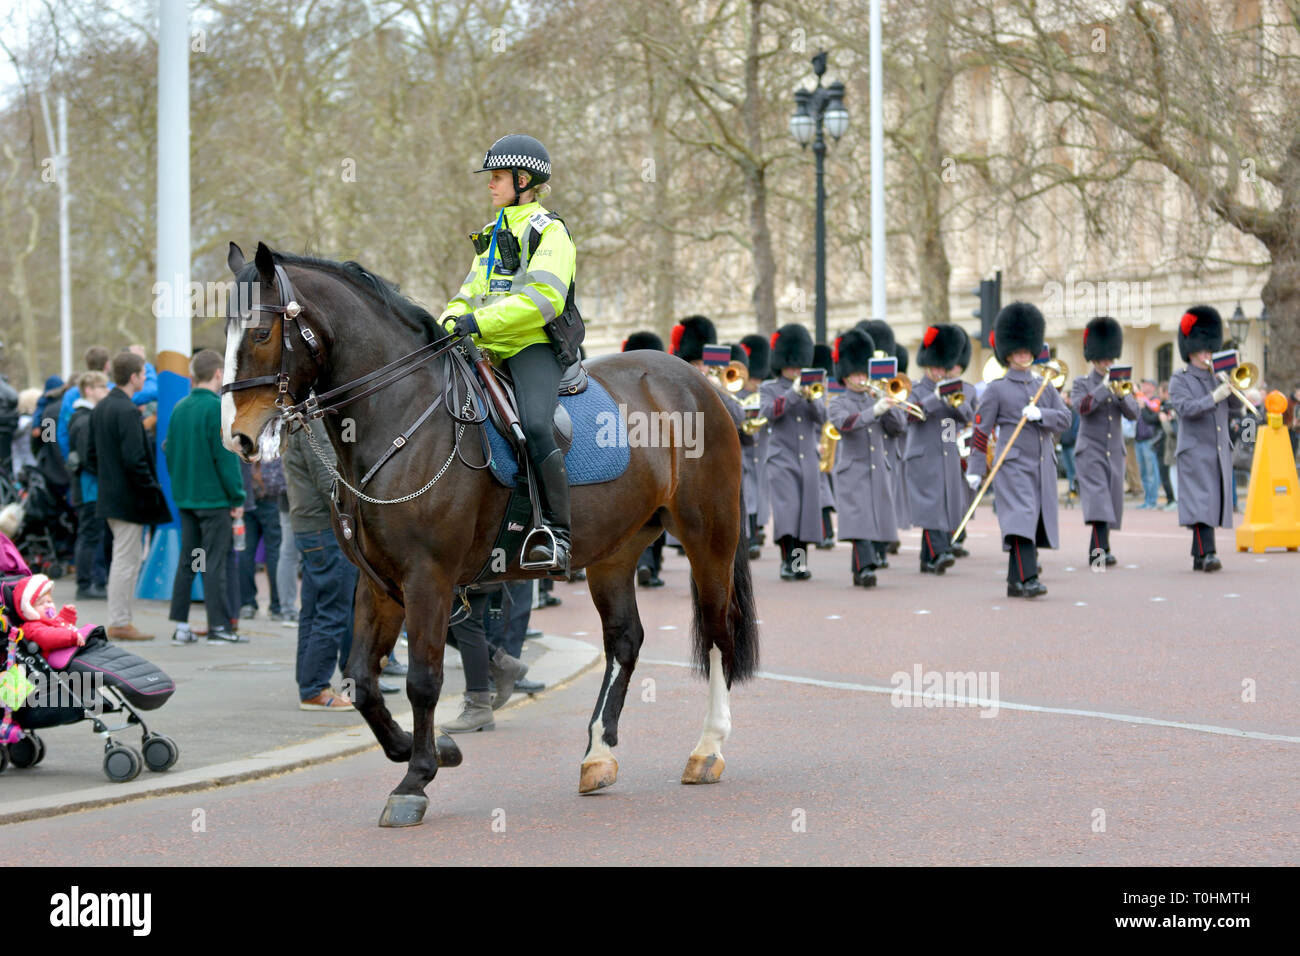 London, England, UK. Celebration of 100 Years of Women in the Metropolitan Police, coinciding with International Women's Day, March 8th 2019 Stock Photo